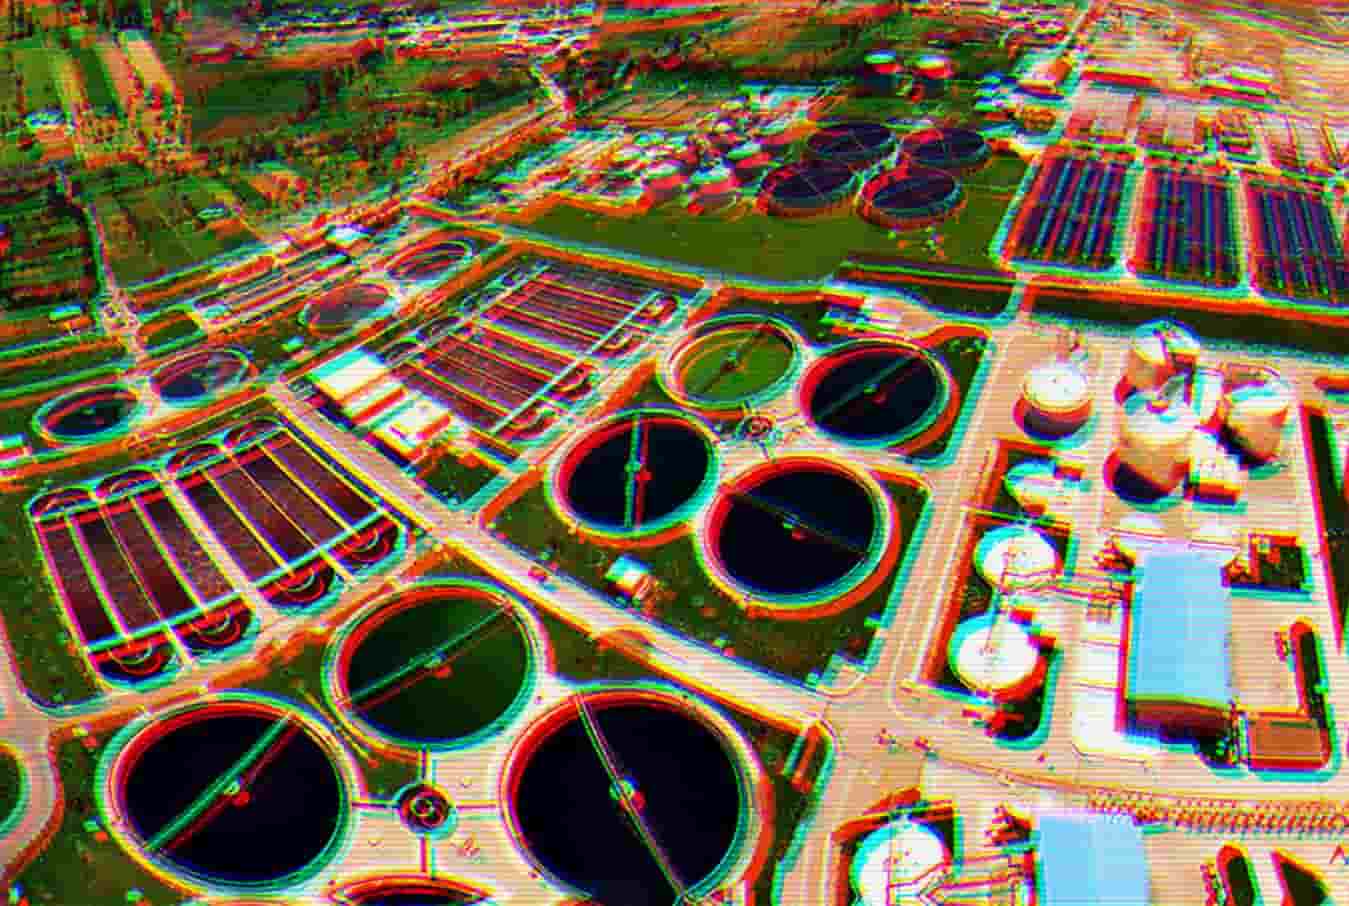 CISA - Ransomware hit SCADA systems of 3 US water facilities